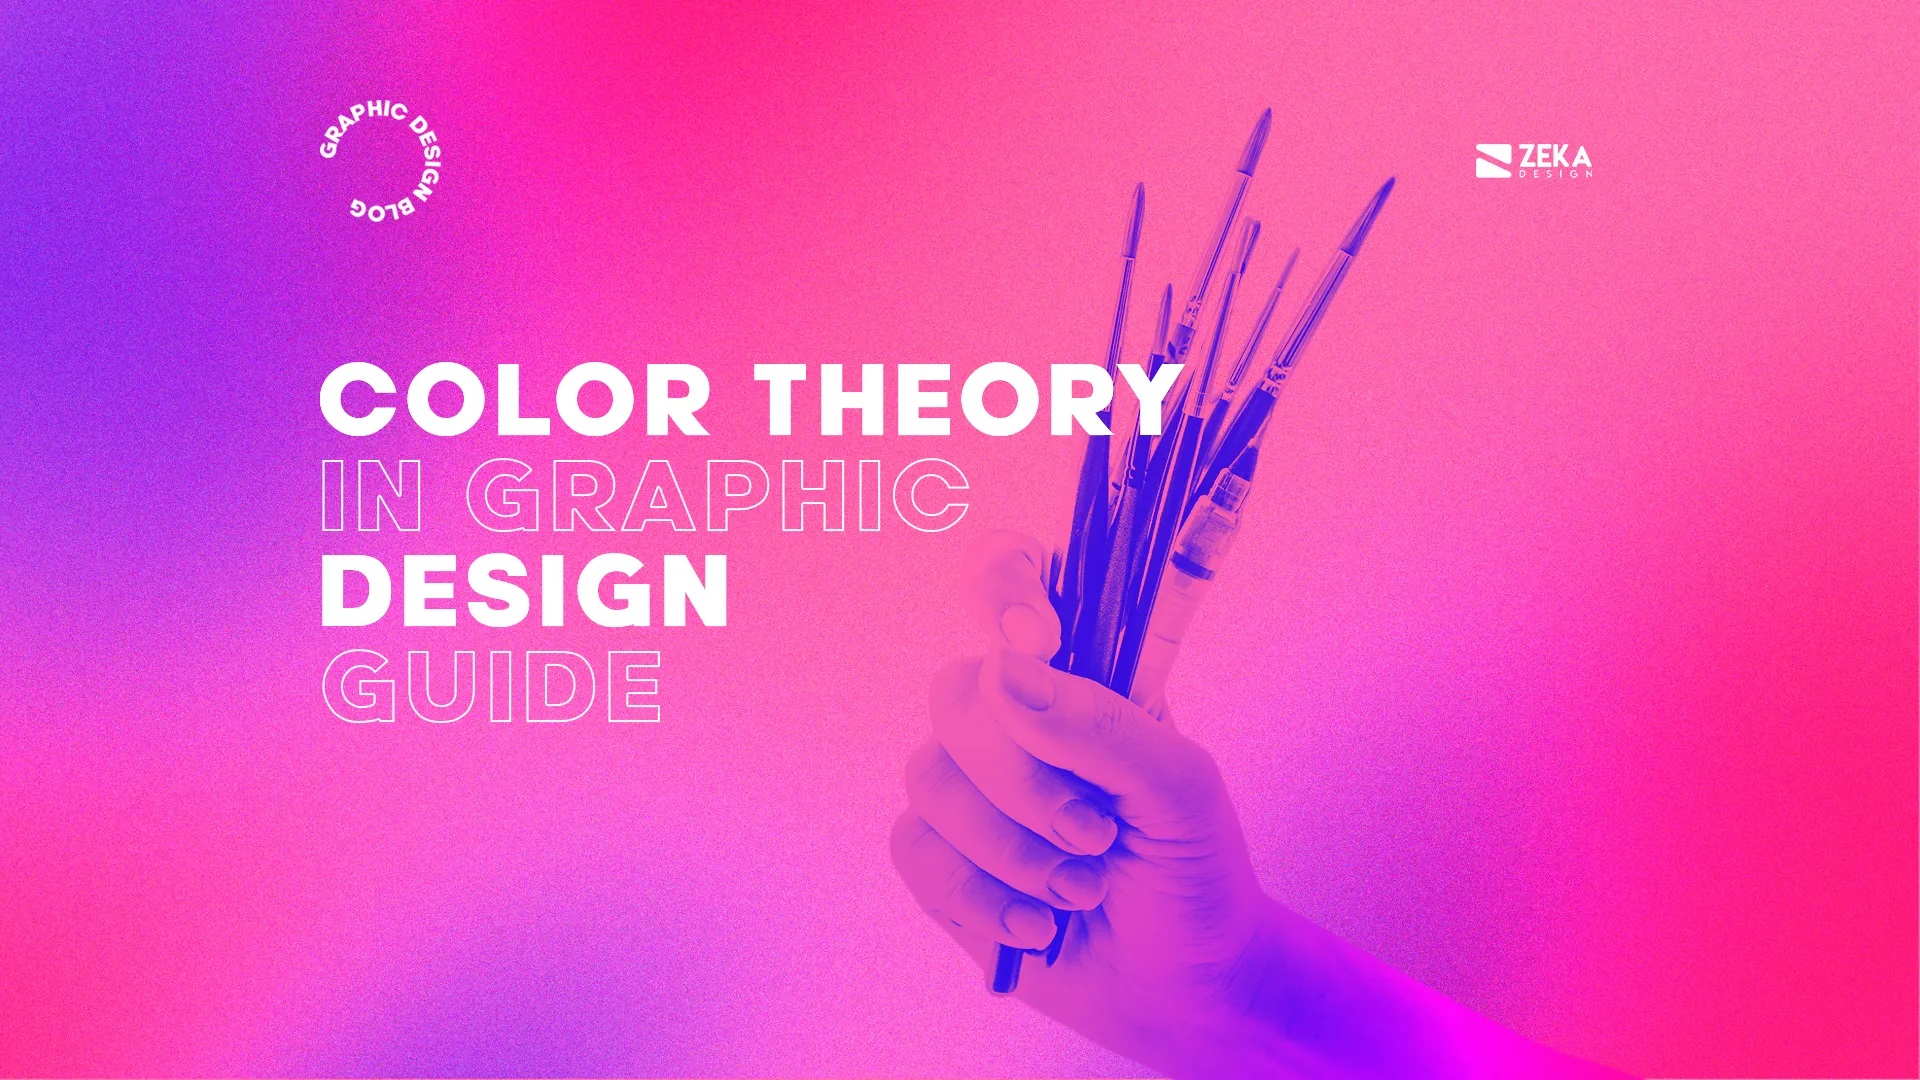 Use of Colour Theory|Graphic Design Studio